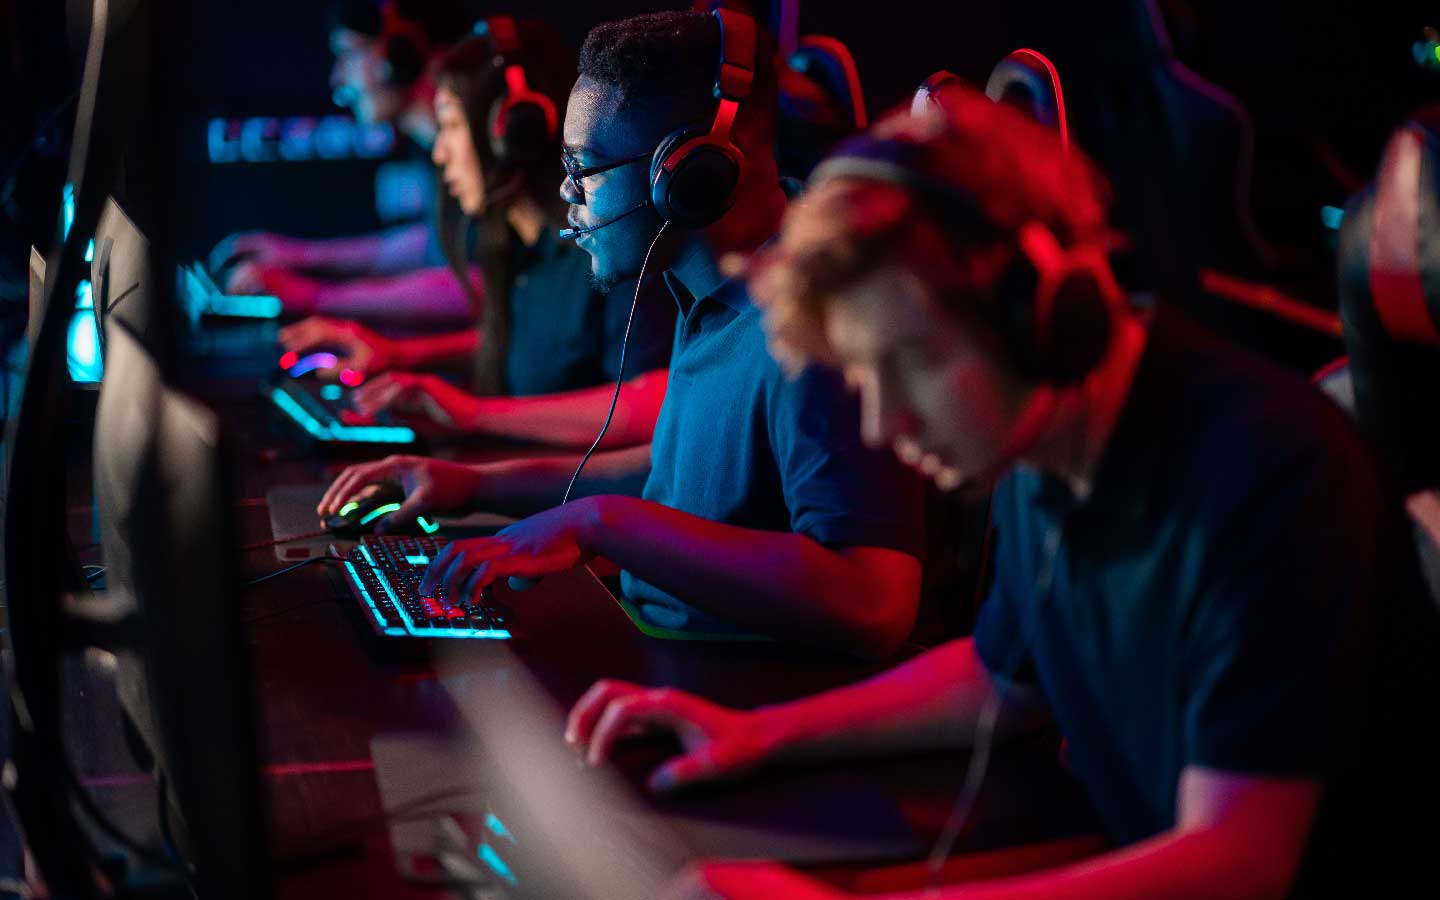 Gaming is becoming more and more popular